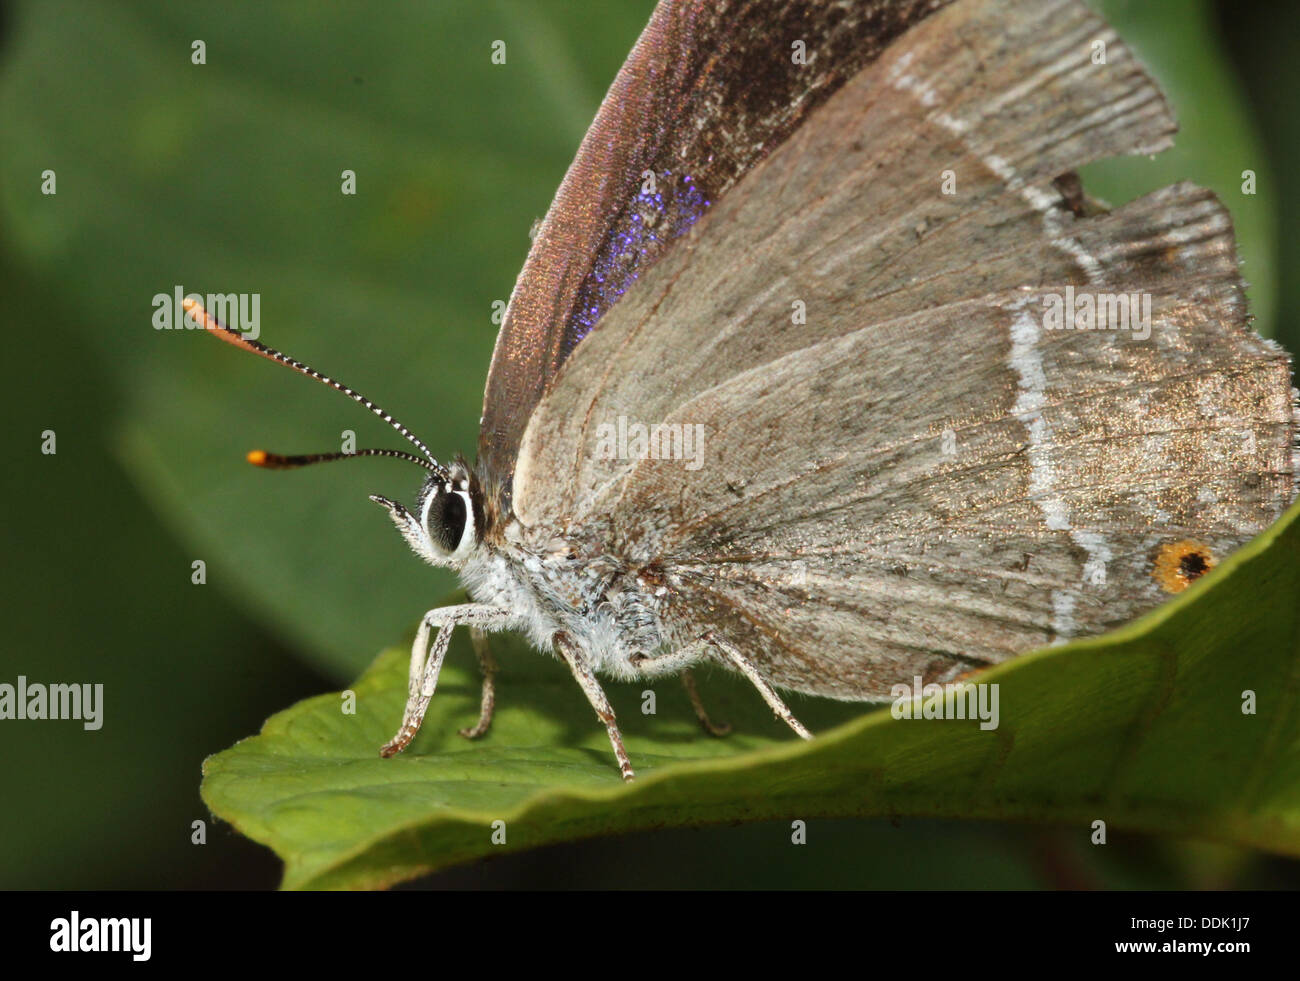 Purple Hairstreak Butterfly (Favonius quercus) foraging and posing on a leaf Stock Photo